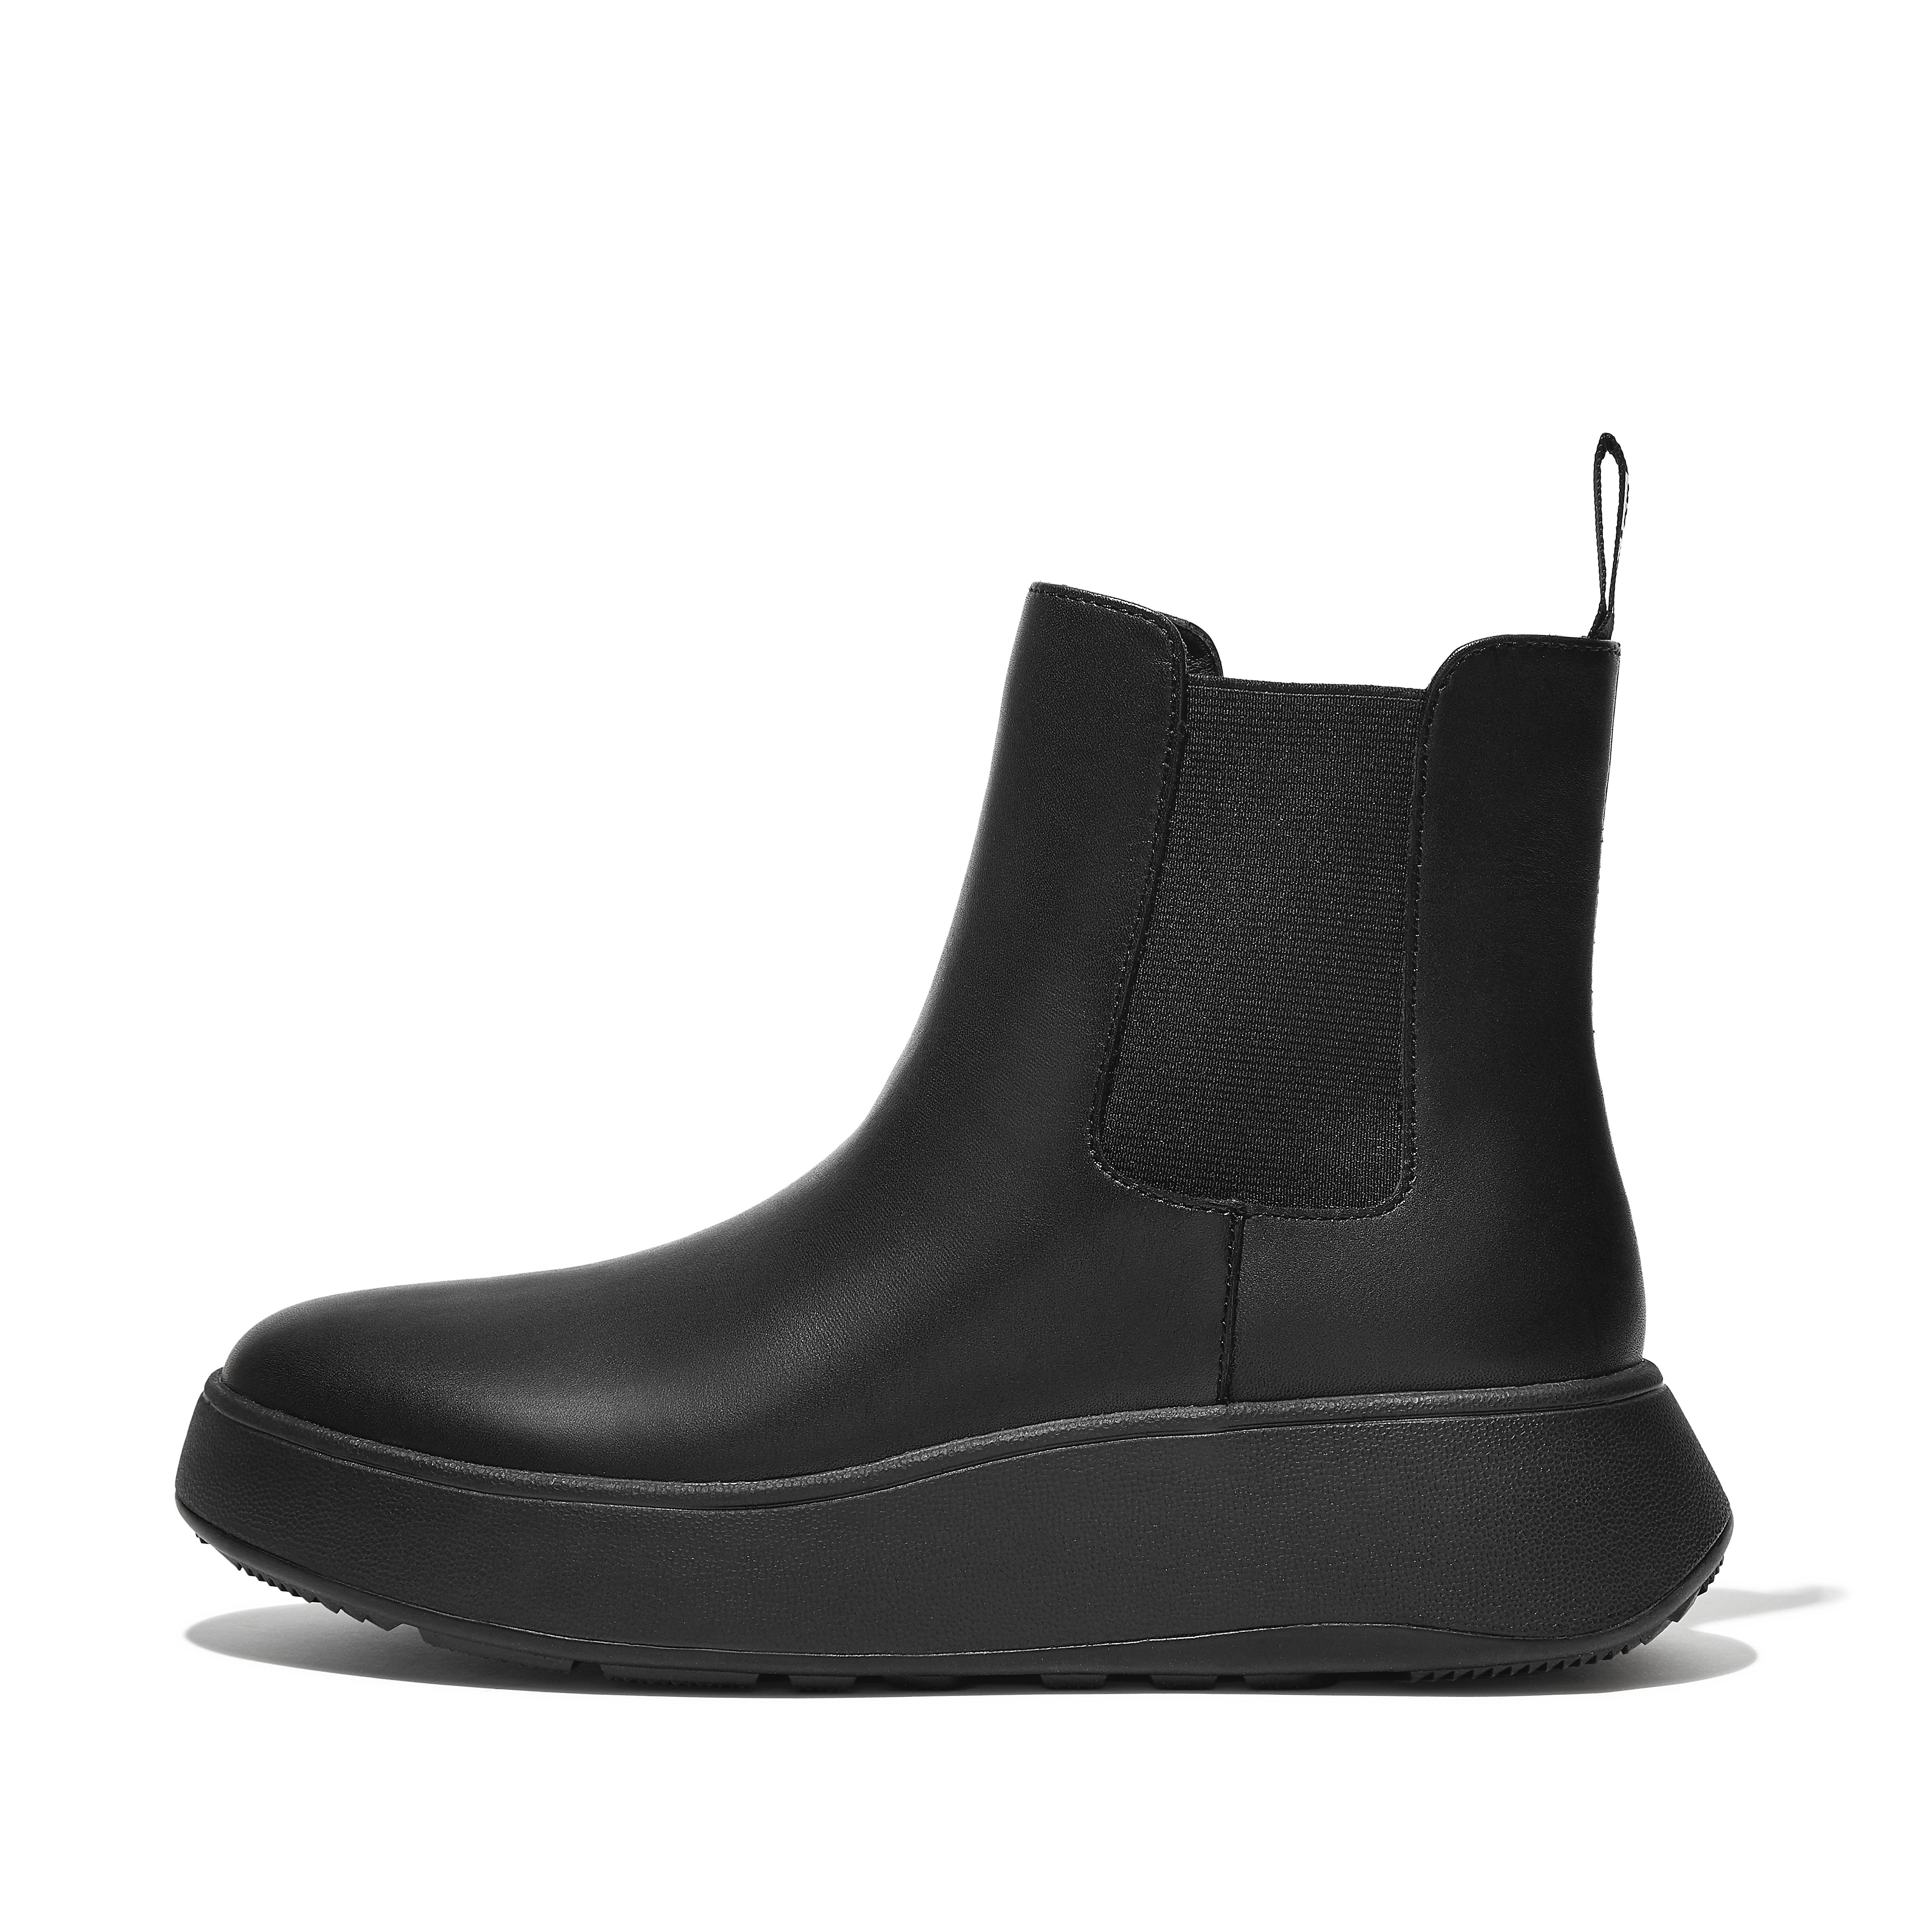 Fitflop Leather Flatform Chelsea Boots,All Black